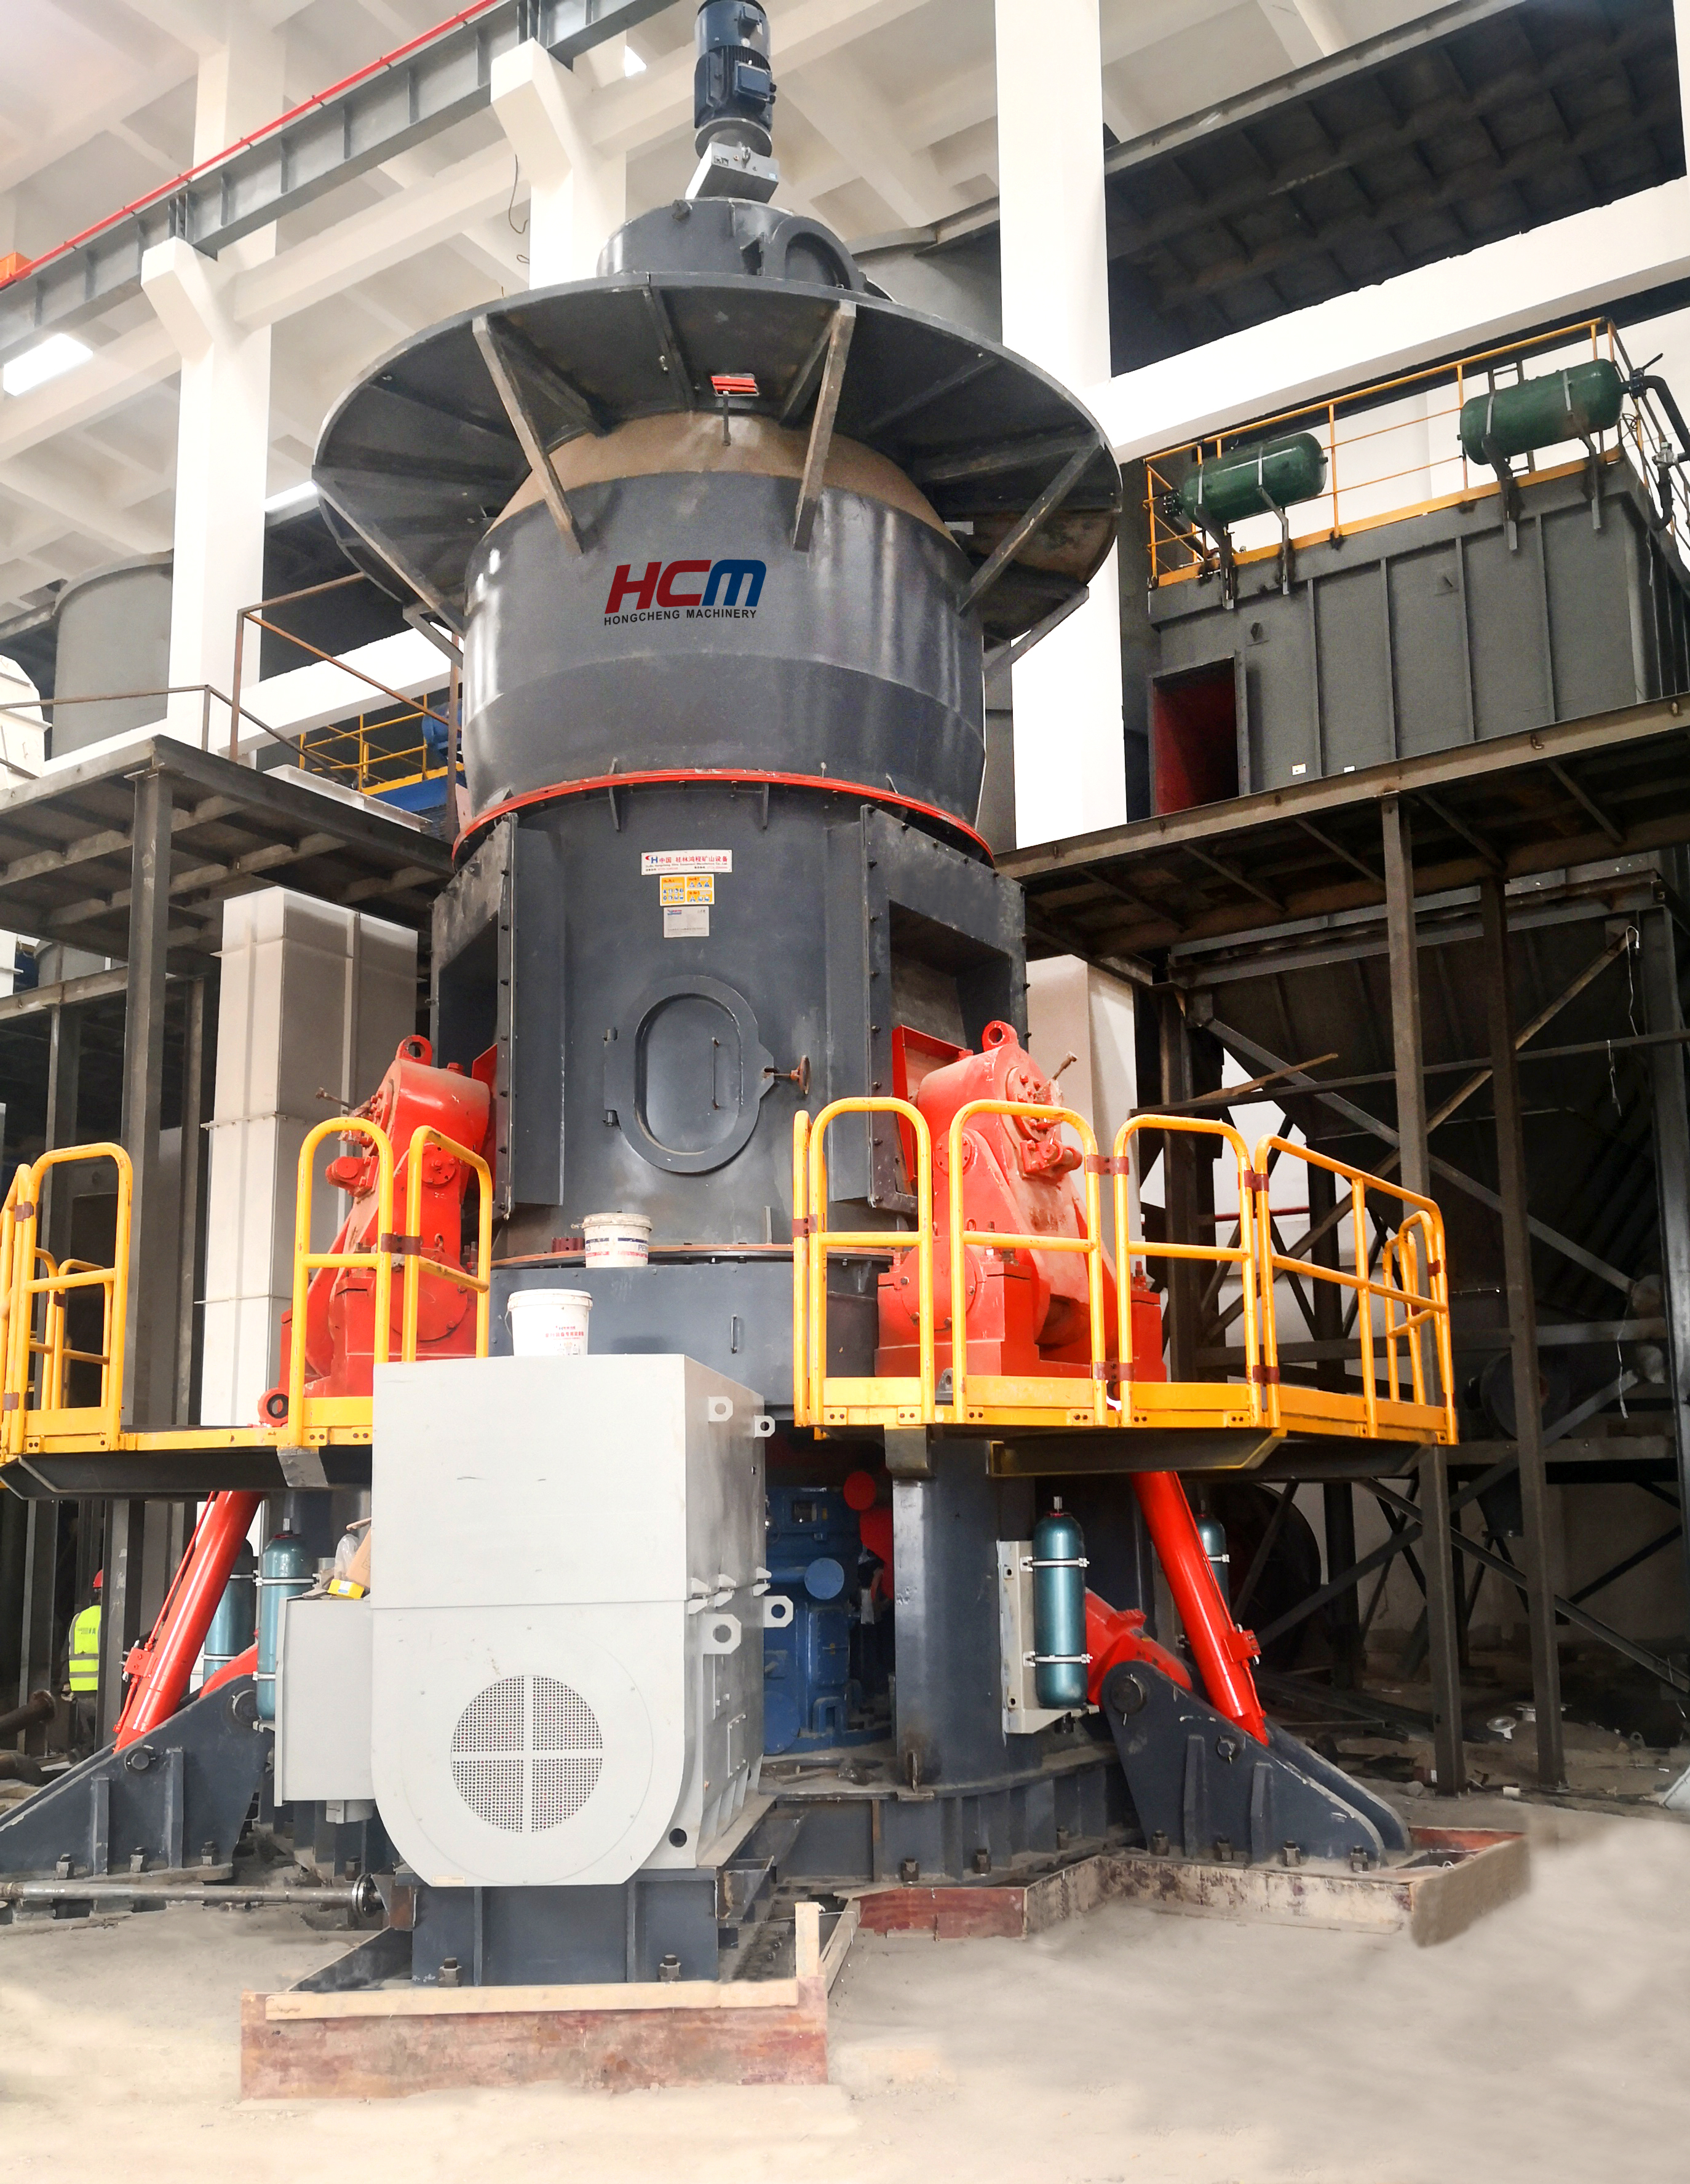 Comparison Between Silicon Vertical Roller Mill And Rotary Silicon Grinding Mill In Silicon Powder Plant